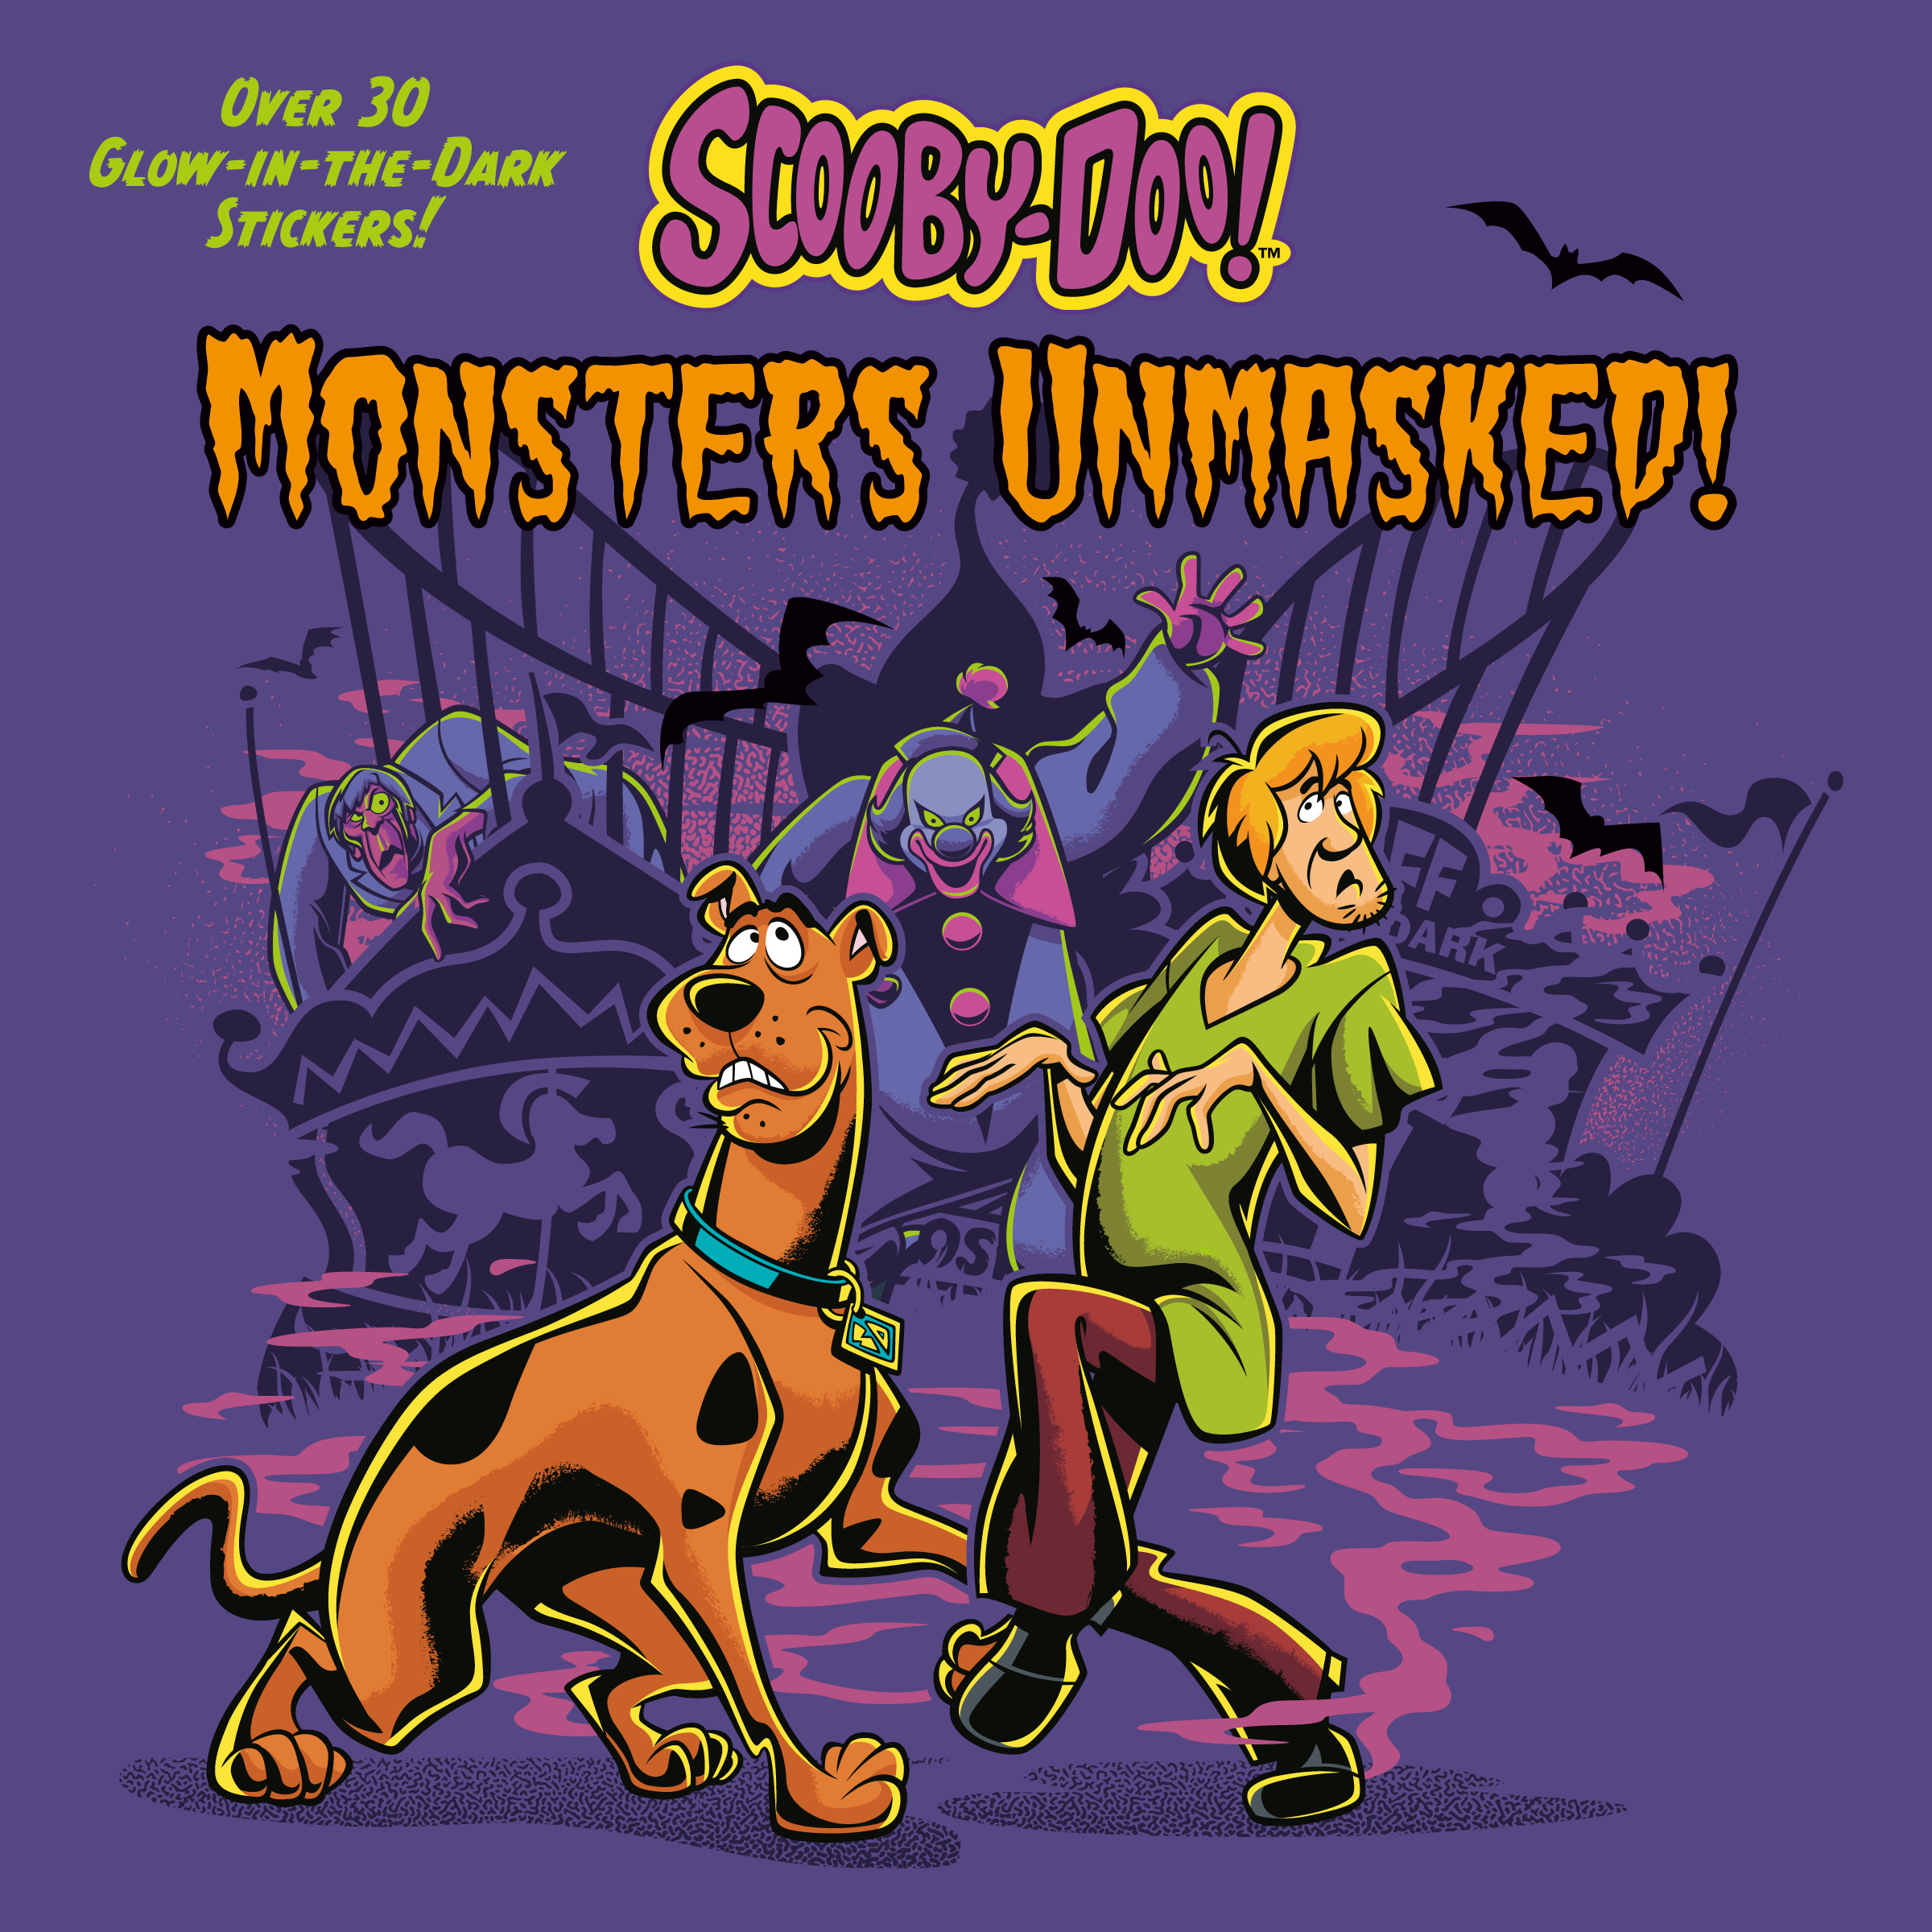 Monsters Unmasked! (Scooby-Doo) | Activity book